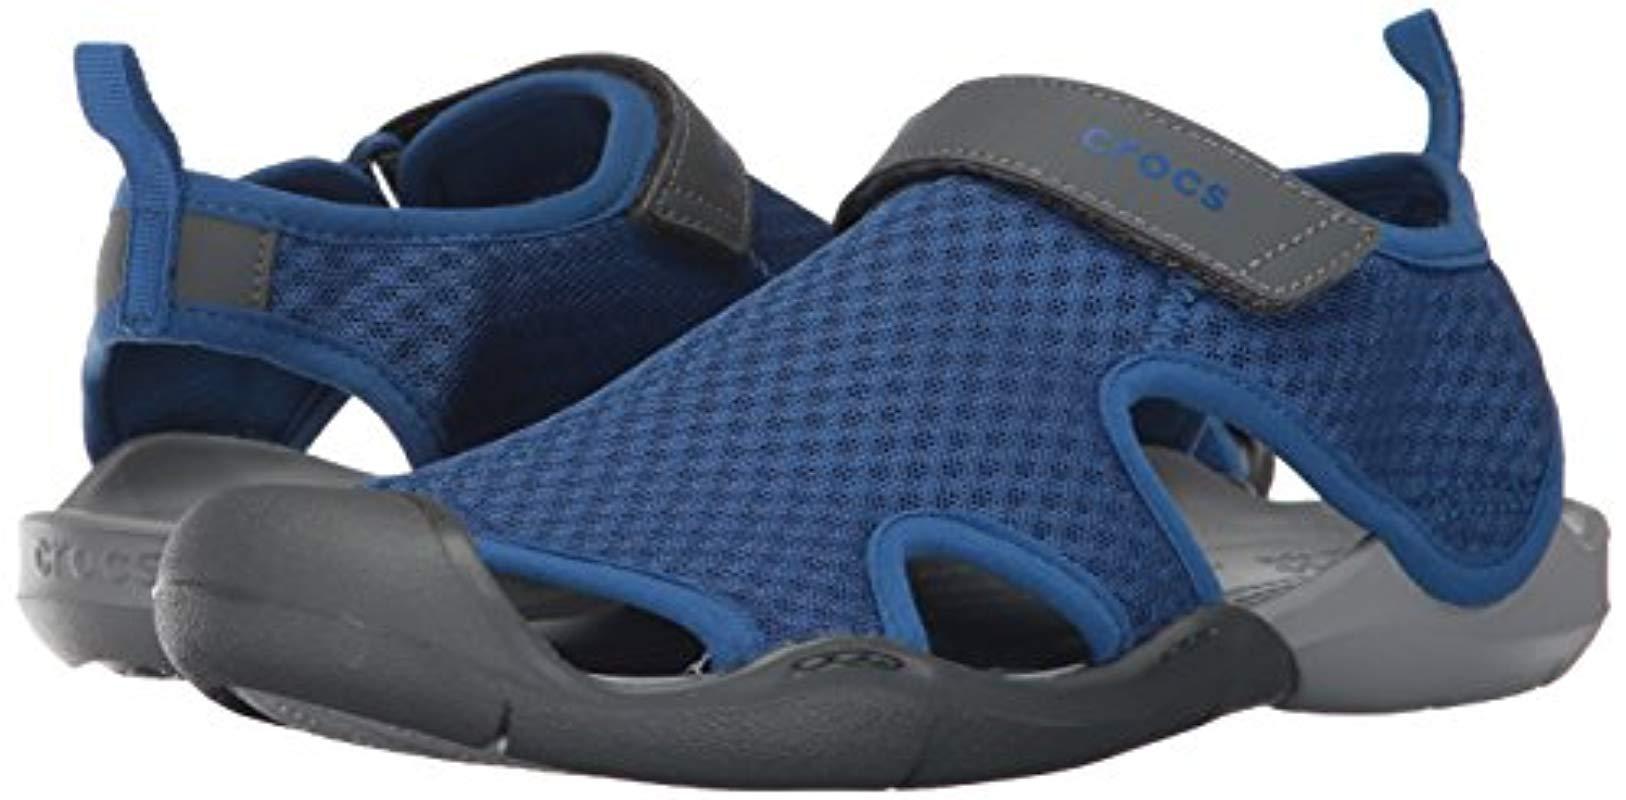  Crocs   Swiftwater Mesh Sandals  in Blue Lyst